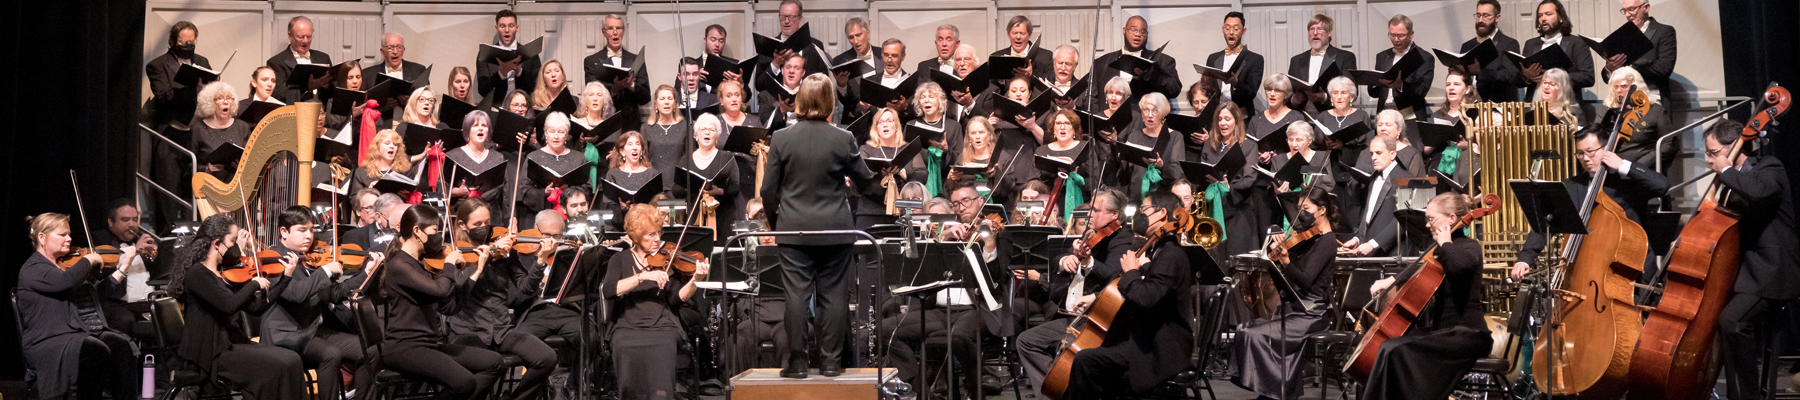 Jo Anne Wasserman stands in front, conducting the SB Choral Society during the Hallelujah Project Concert